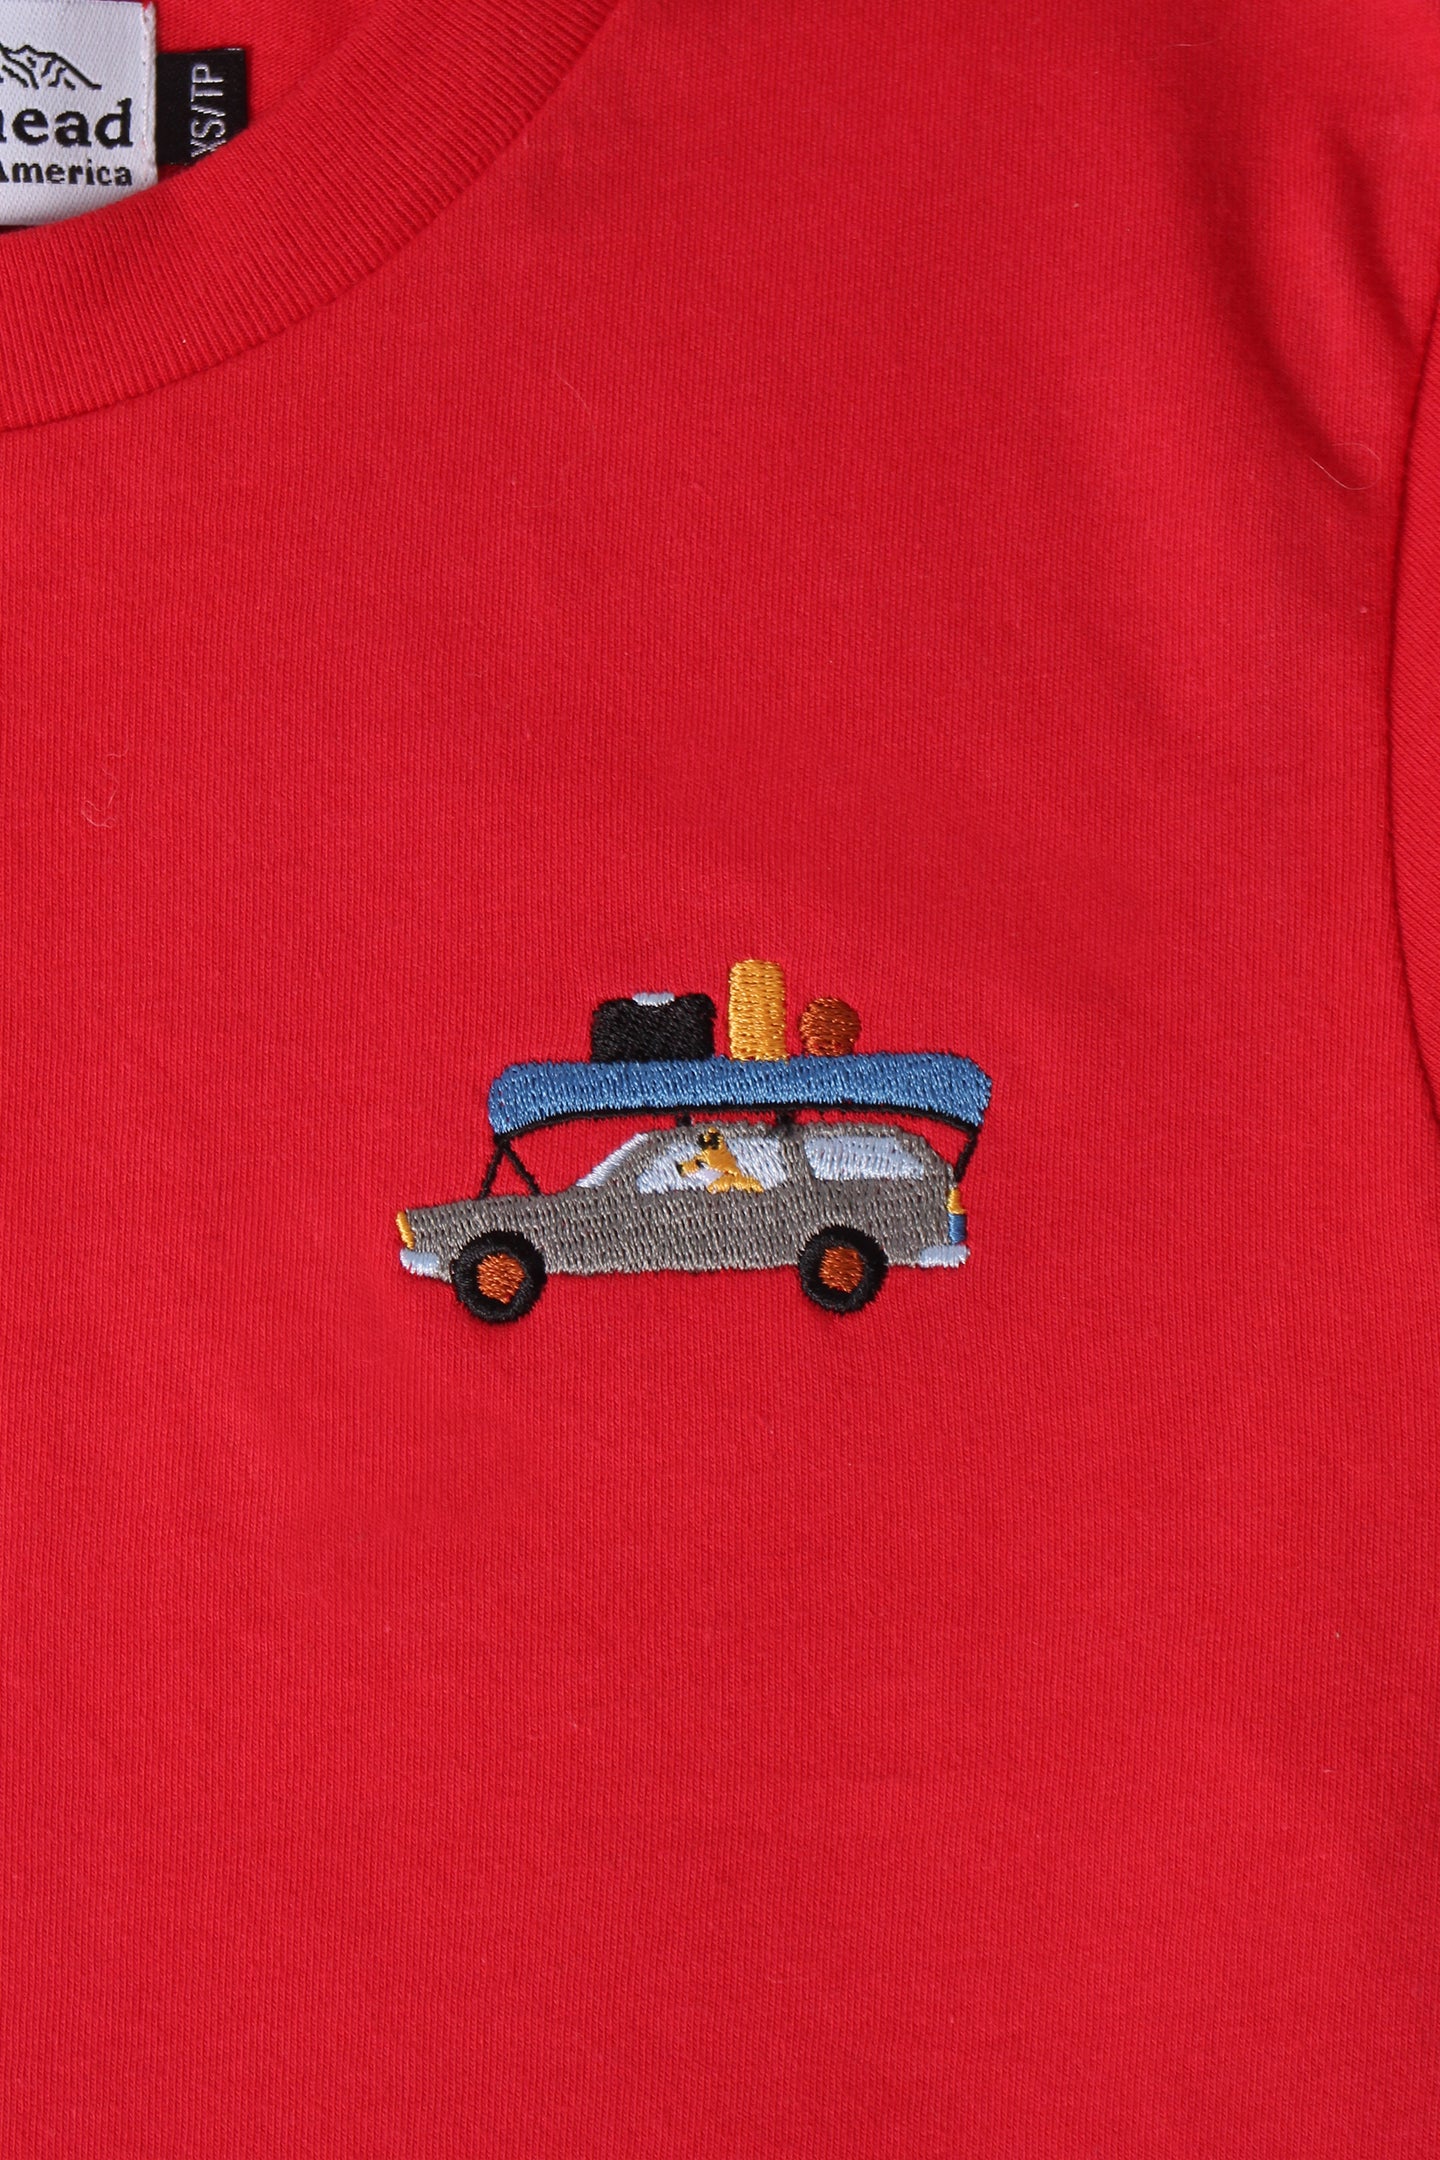 Classic Tee - Red - Road Trip Embroidery - CAMP Series